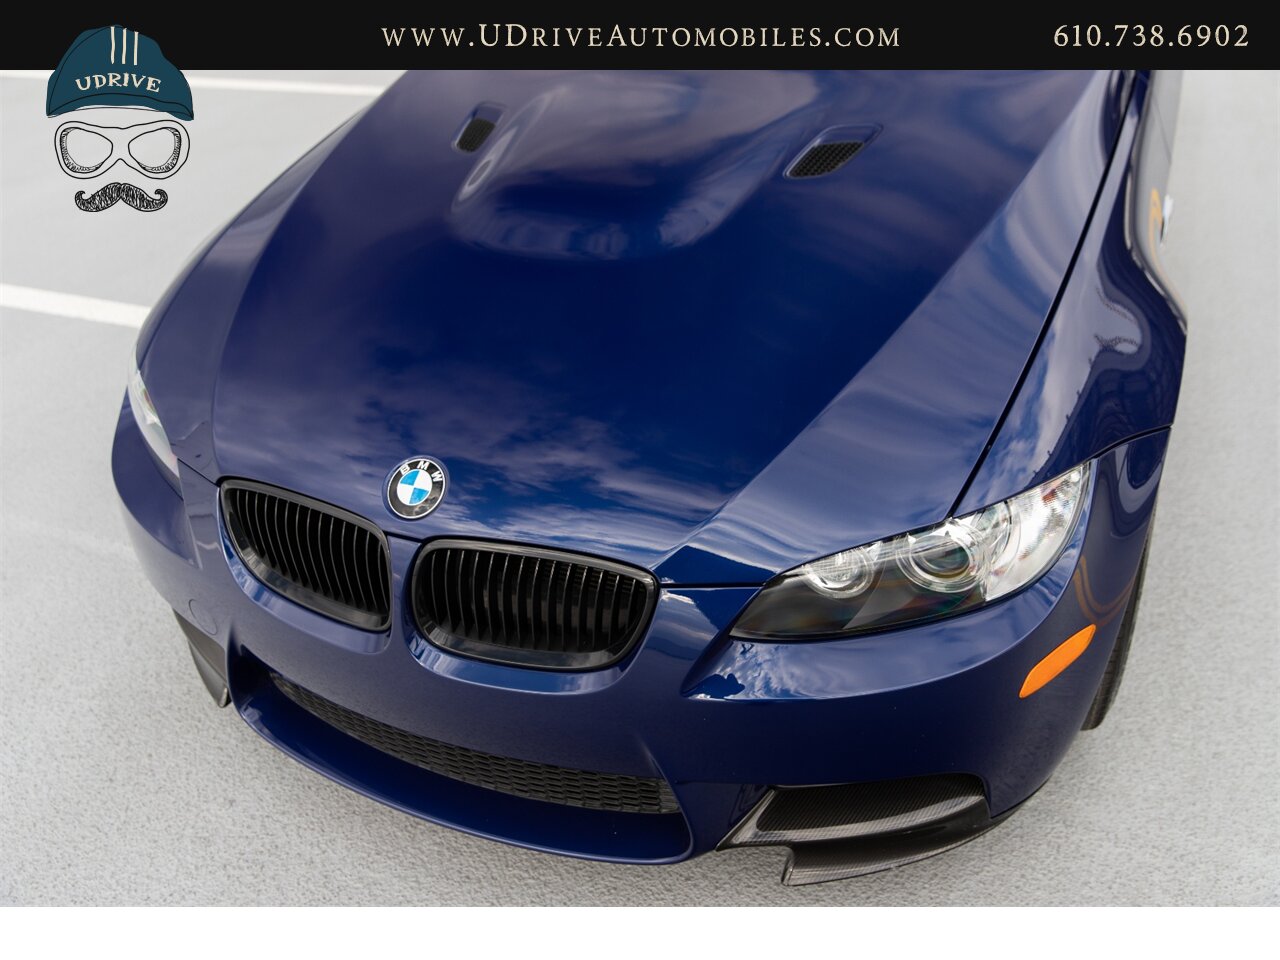 2011 BMW M3 E92 6 Speed Manual Competition Pkg Interlagos Blue  16k Miles Nav PDC EDC Comf Acc - Photo 11 - West Chester, PA 19382